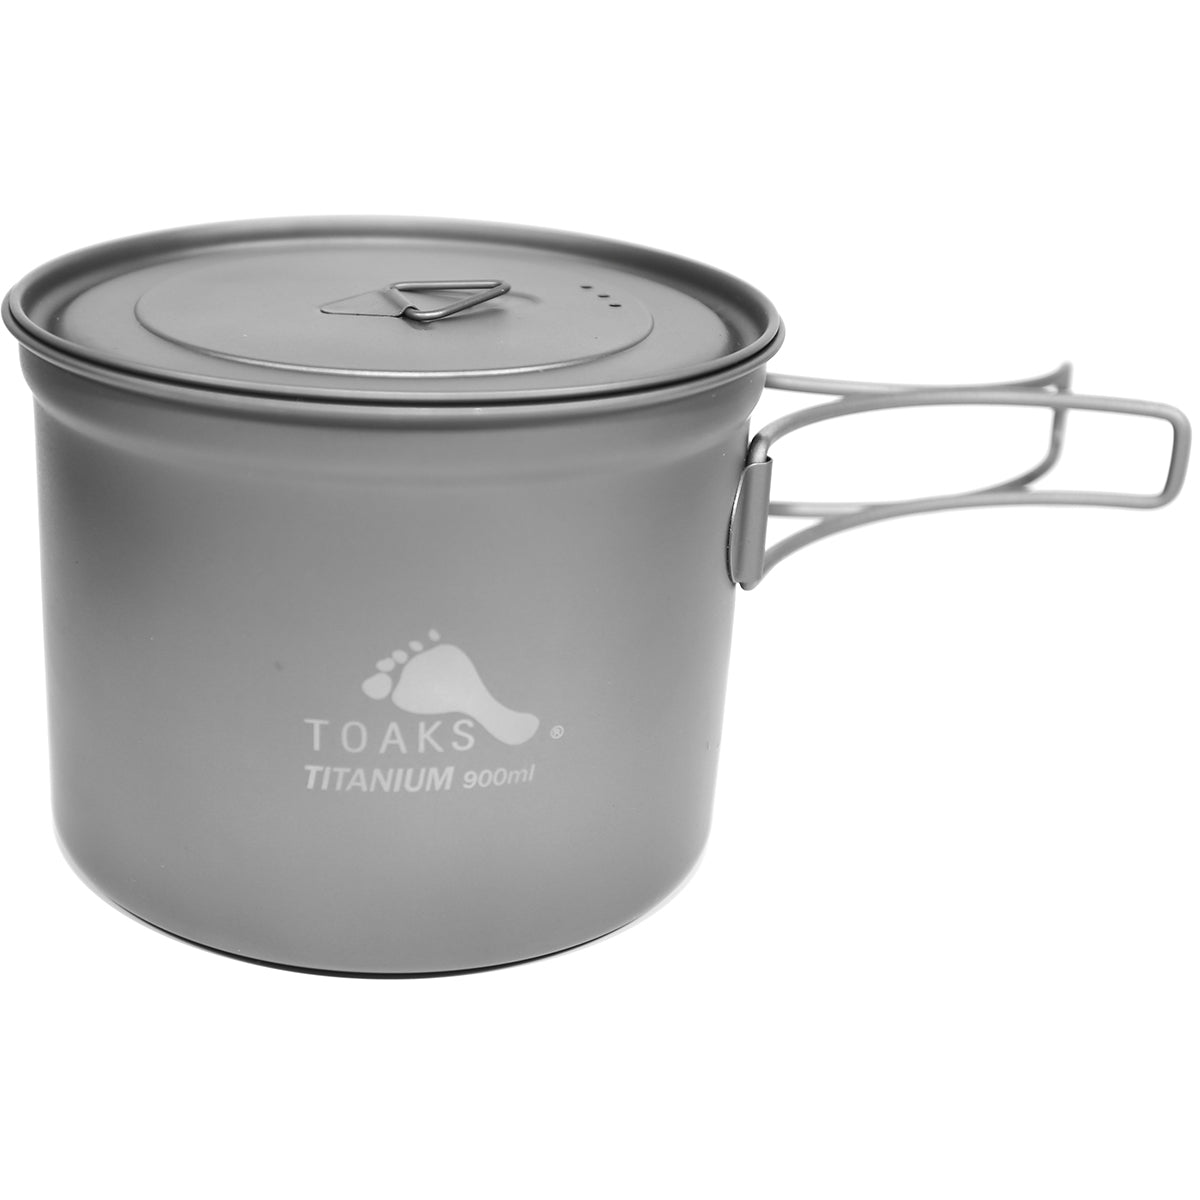 TOAKS 900ml D115mm Titanium Camping Cooking Pot with Foldable Handles TOAKS